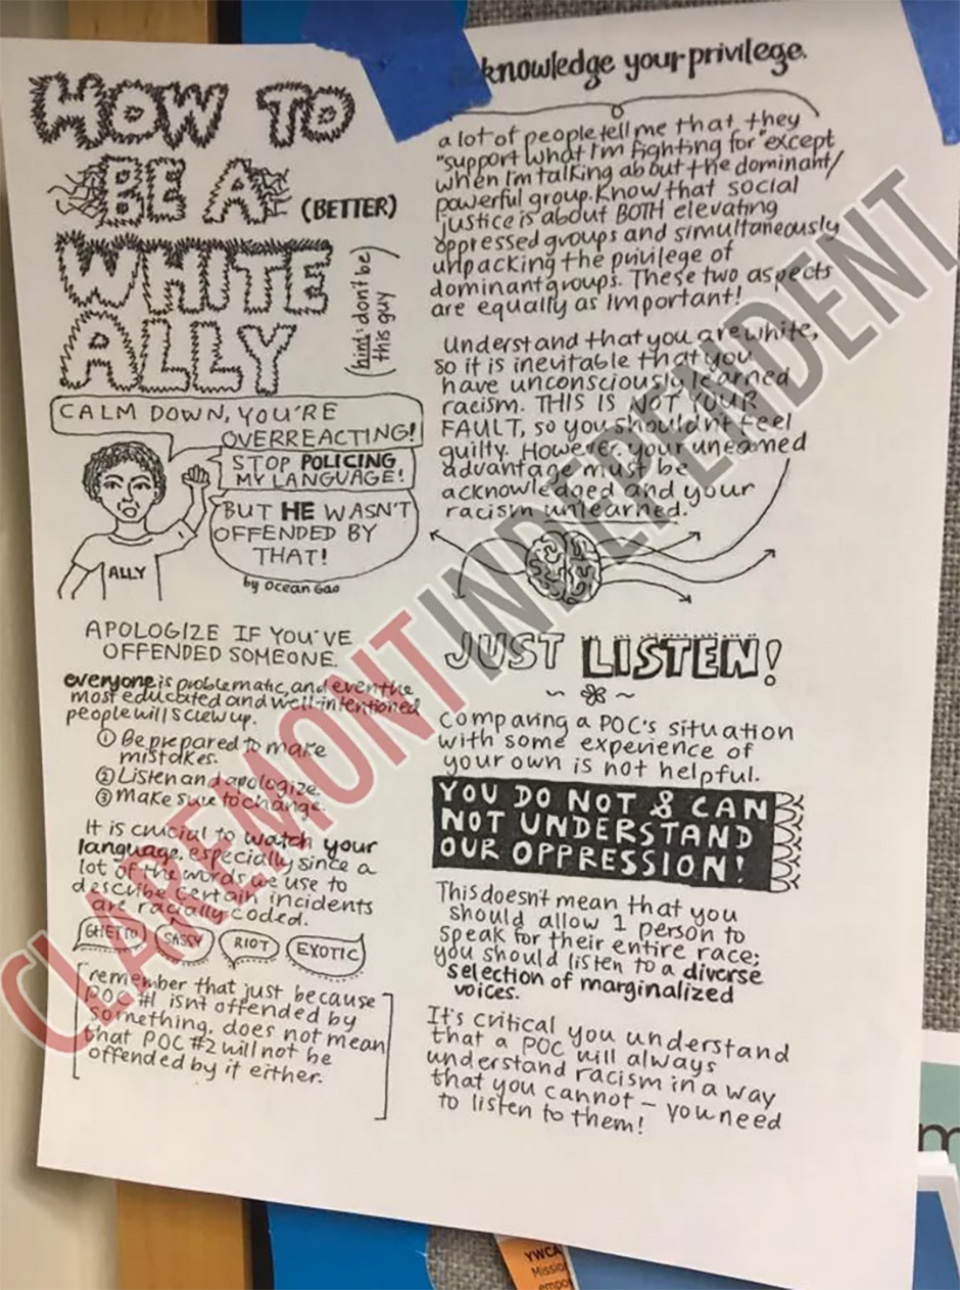 'How To Be a White Ally' posters say all white people are